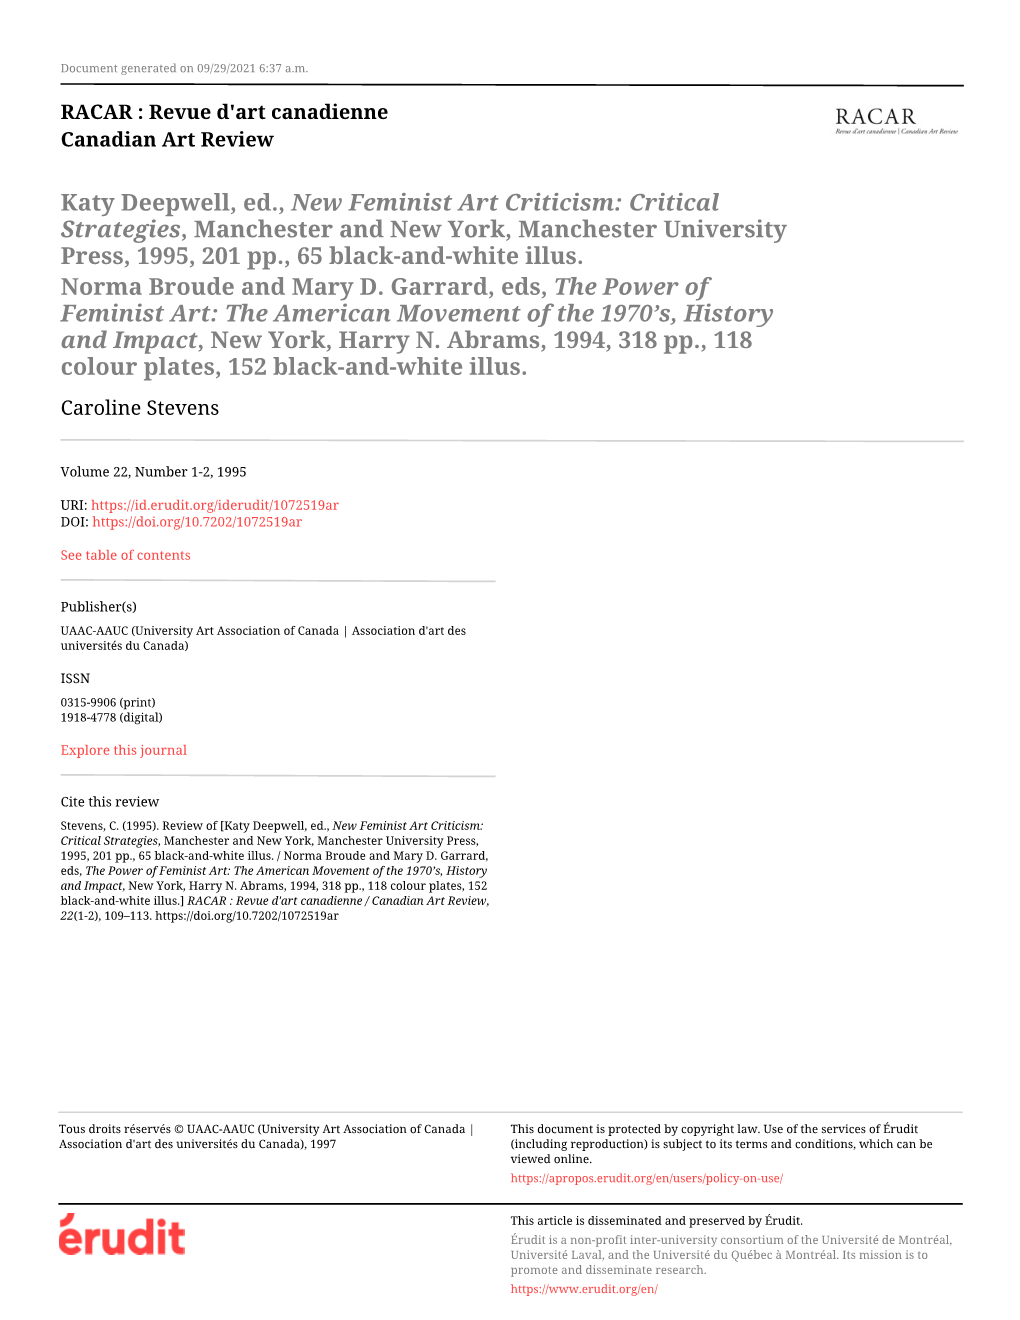 Katy Deepwell, Ed., New Feminist Art Criticism: Critical Strategies, Manchester and New York, Manchester University Press, 1995, 201 Pp., 65 Black-And-White Illus